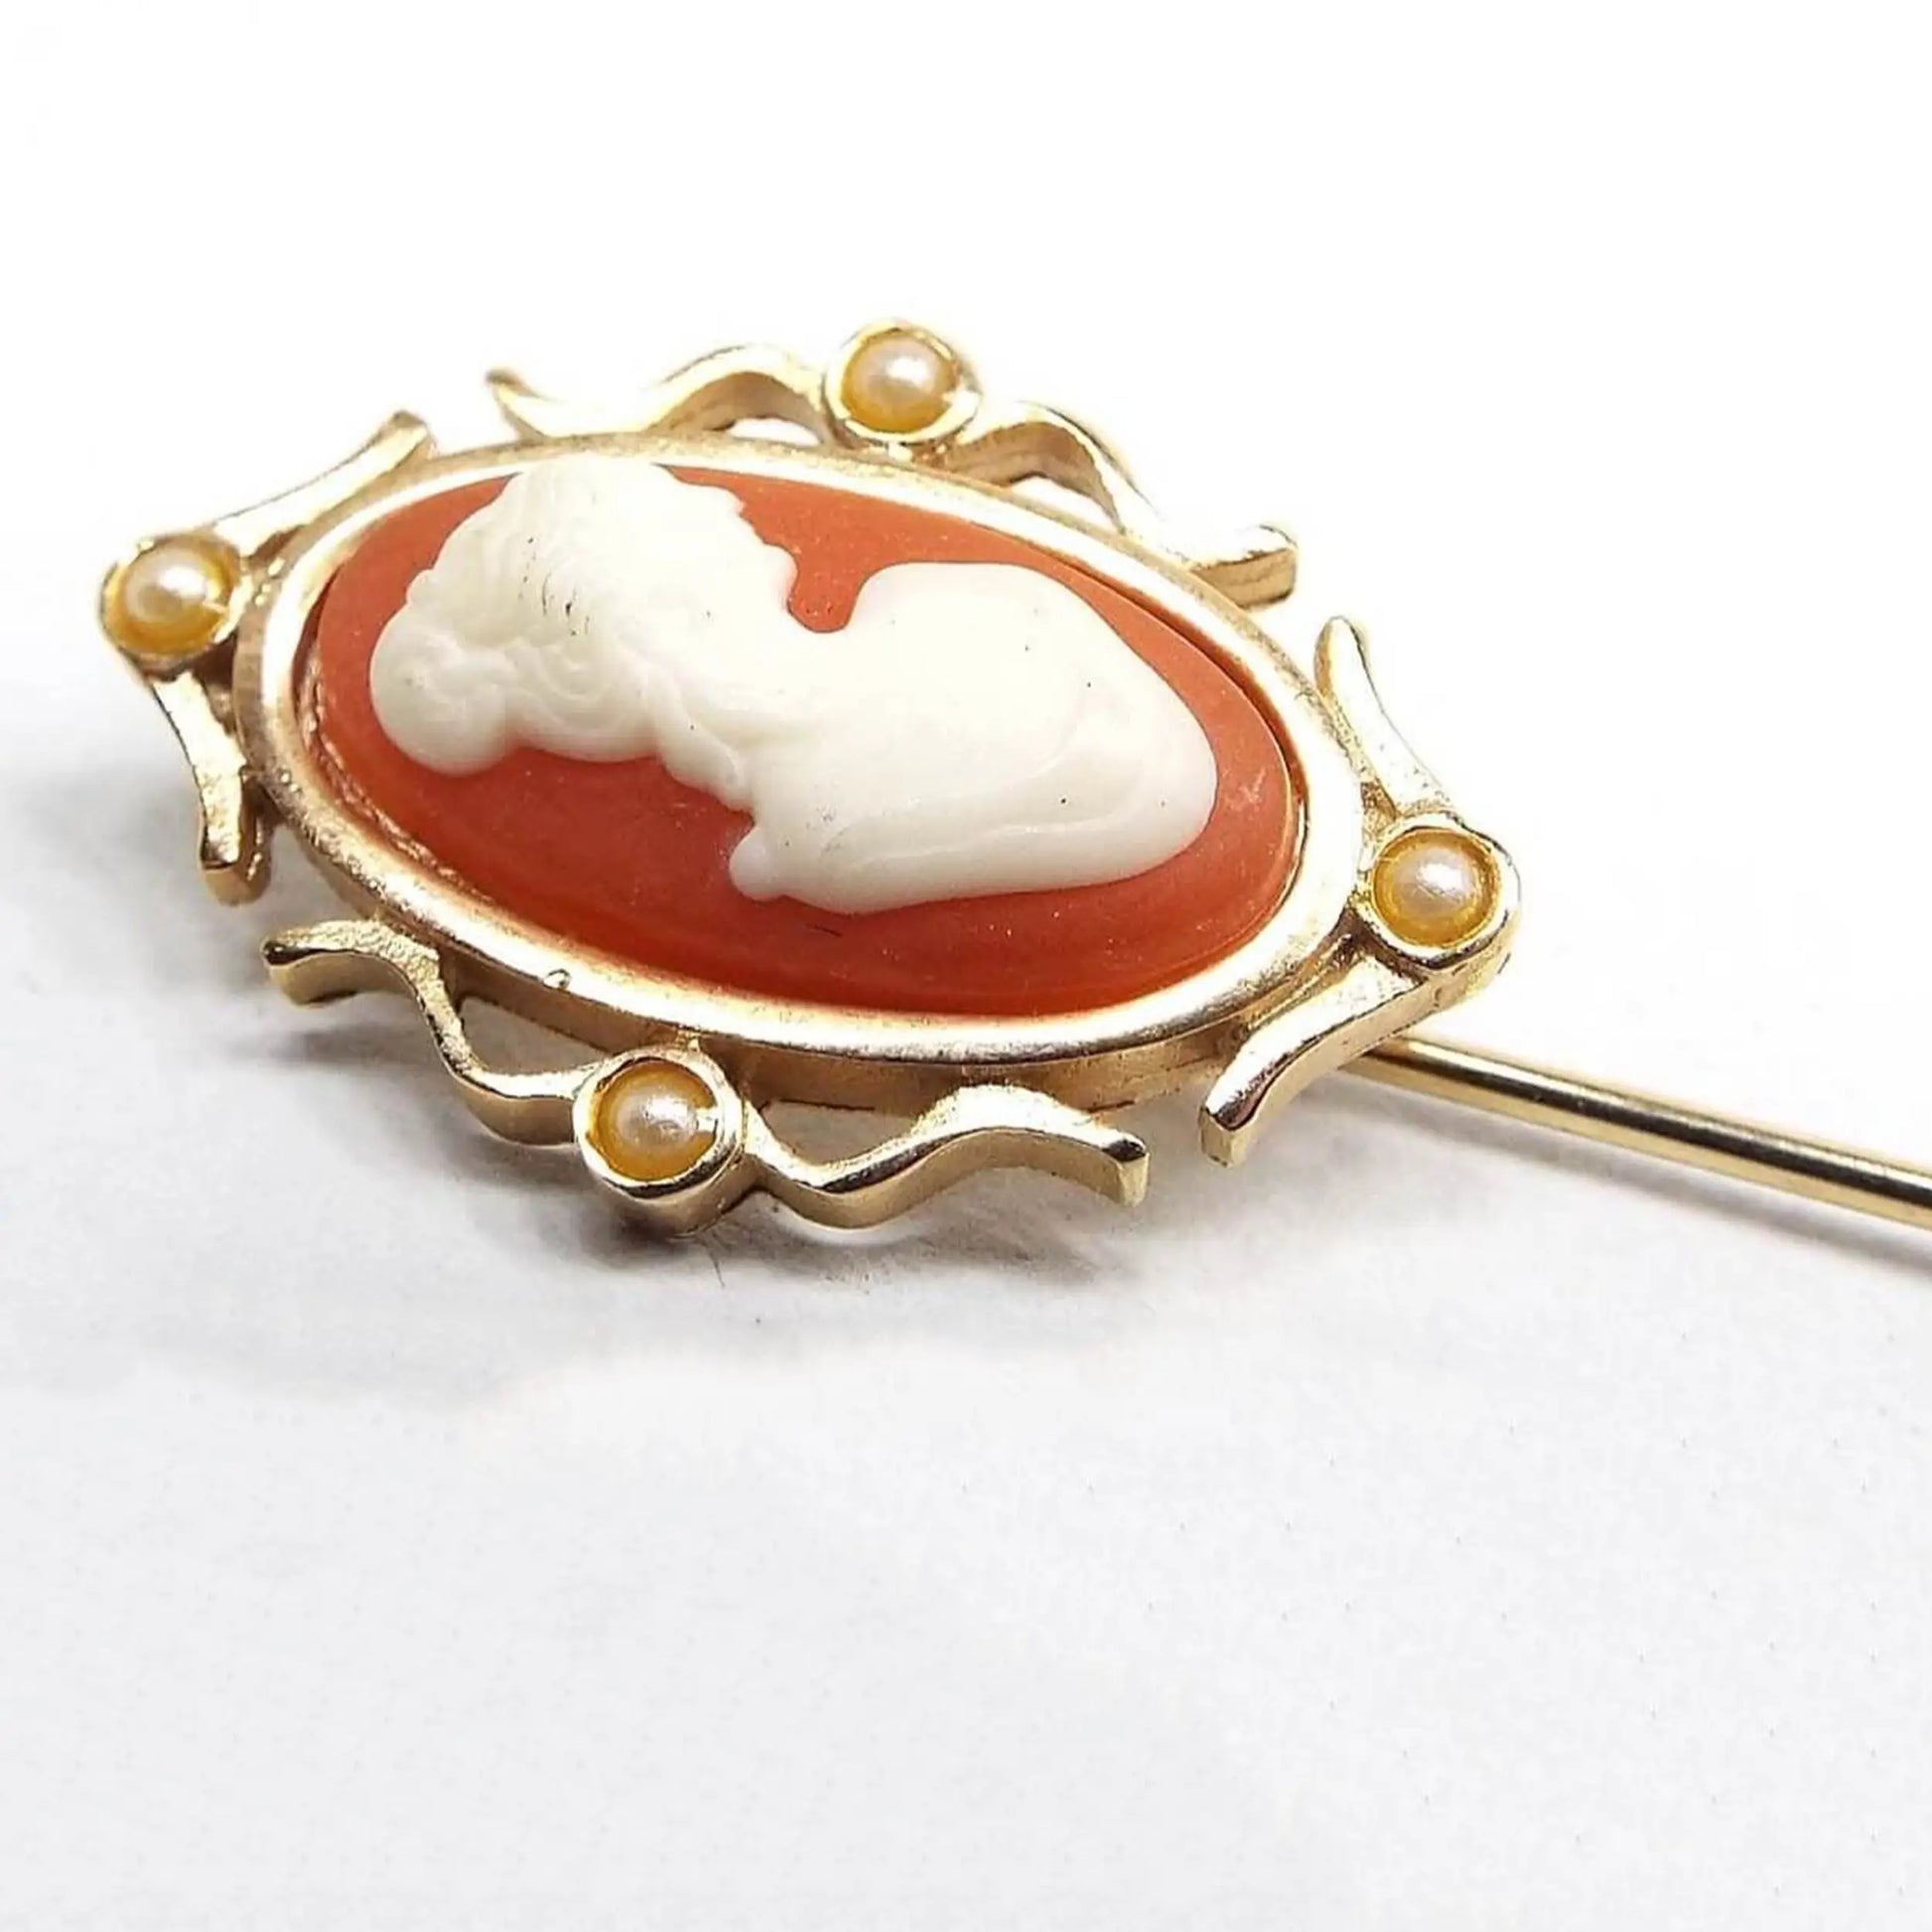 Magnified view of the top part of the Avon retro vintage cameo stick pin. The metal is gold tone in color. It has plastic cameo bust of a woman on a salmon orange background. The top is oval with a metal fancy curved frame on each side with an off white faux pearl on each side.